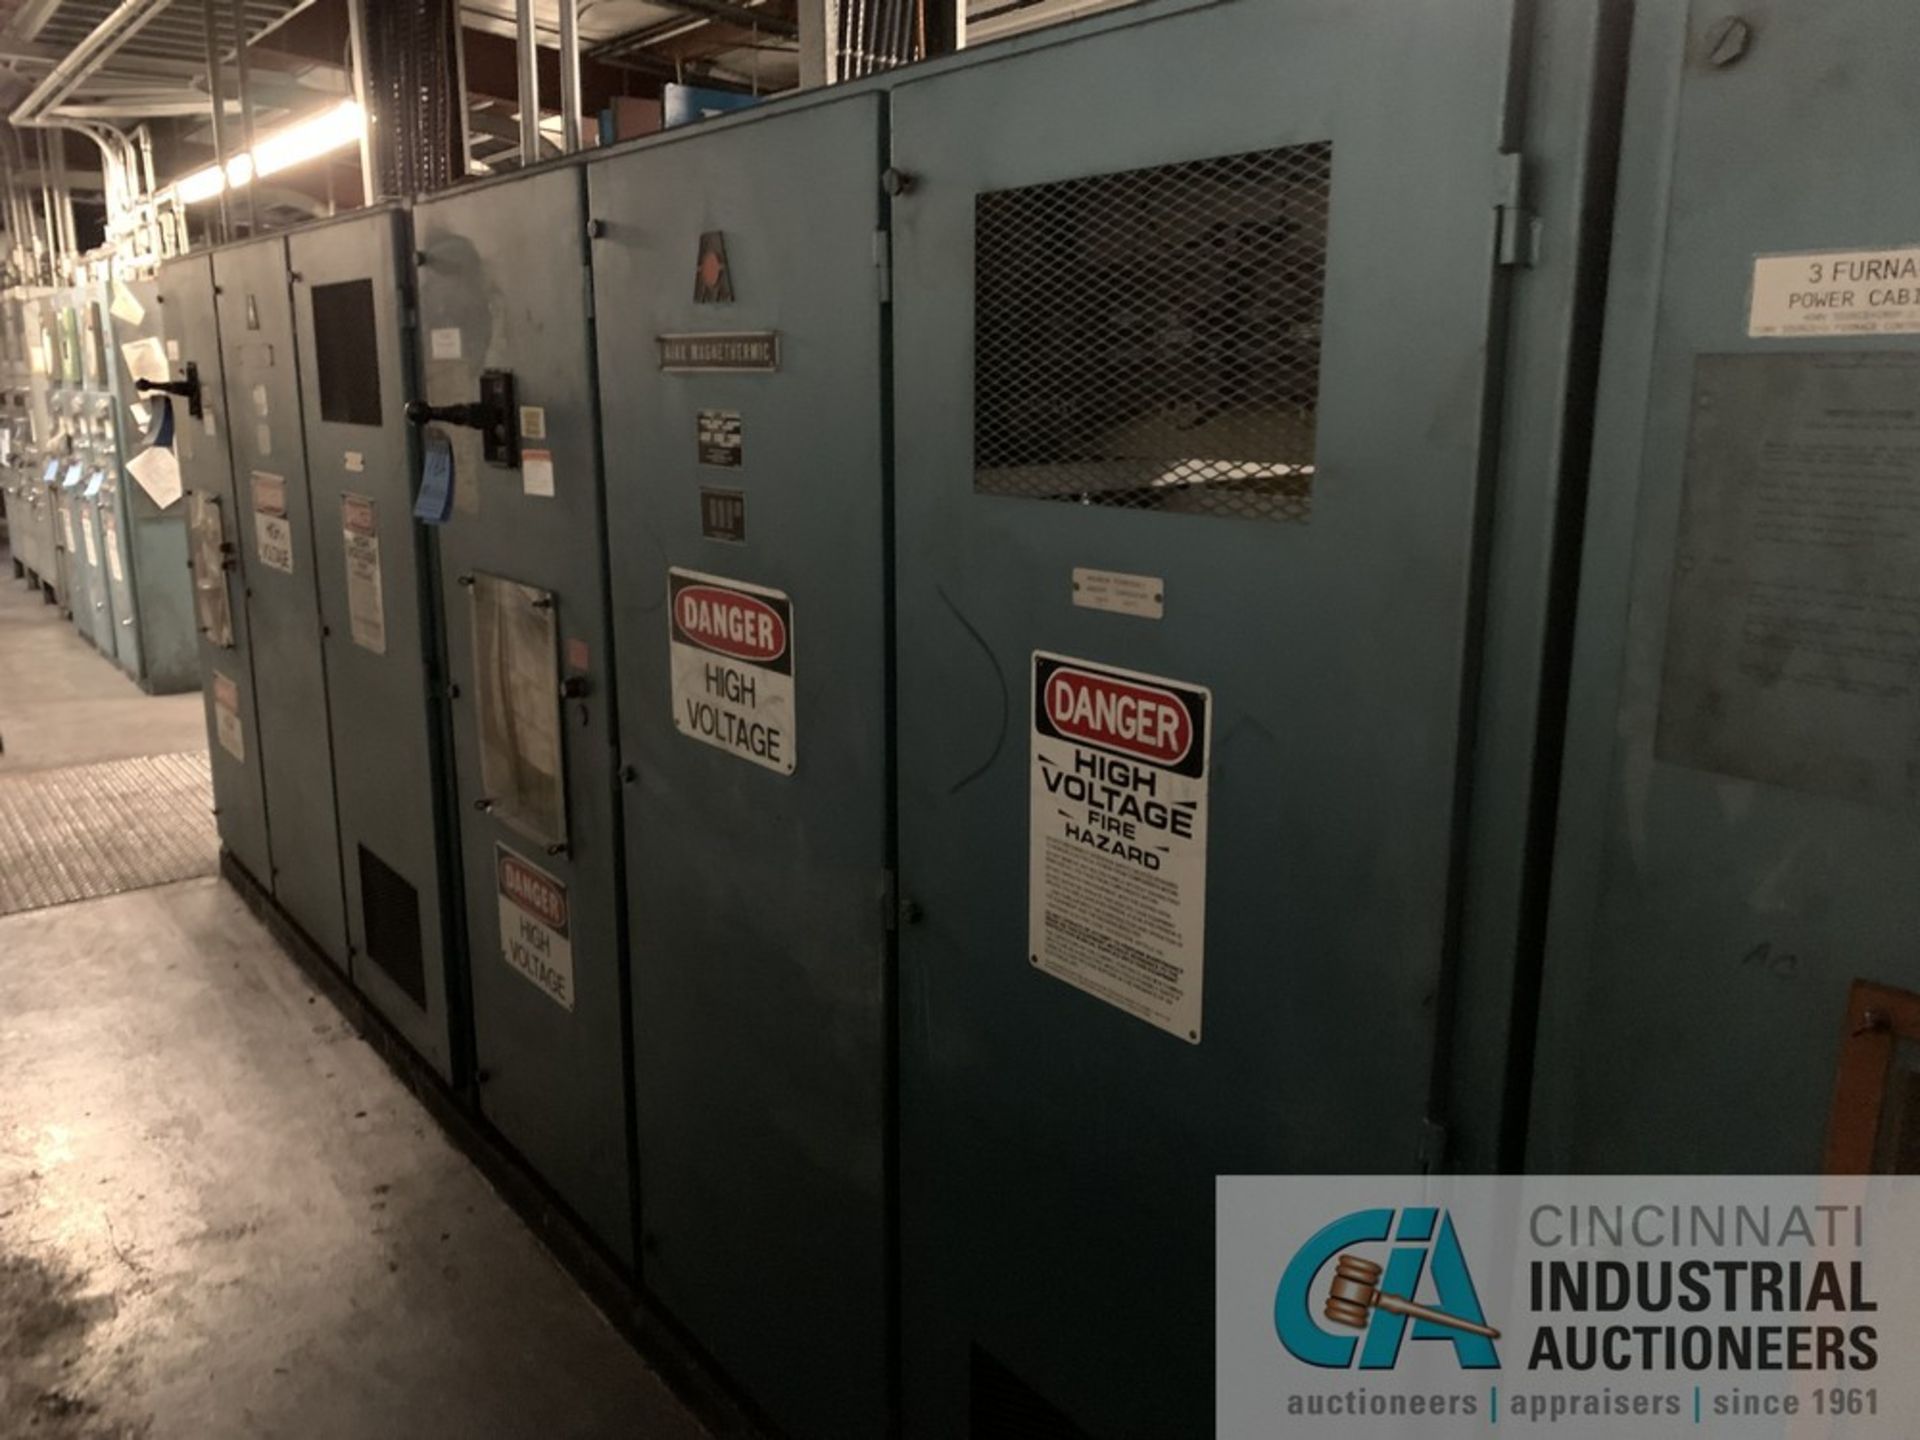 500 KW AJAX MAGNATHERMIC POWER SUPPLY AND CONTROL; 575V, 1,000 KVA, 1,750 AMP, 500 KW, CONTROL PANEL - Image 7 of 14